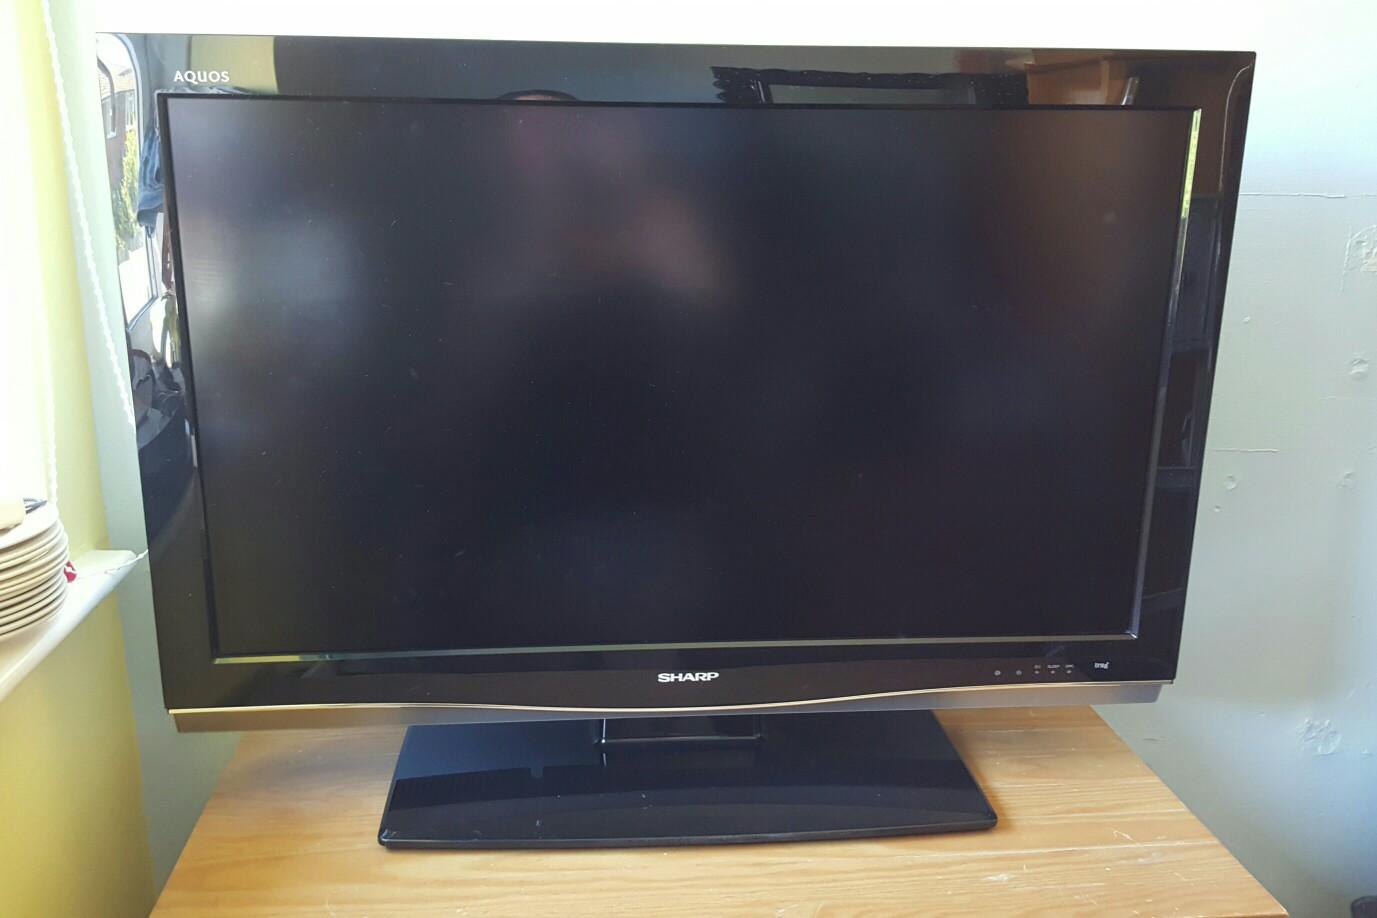 Sharp Aquos LCD TV 37 inch in LE18 Wigston for £90.00 for ...